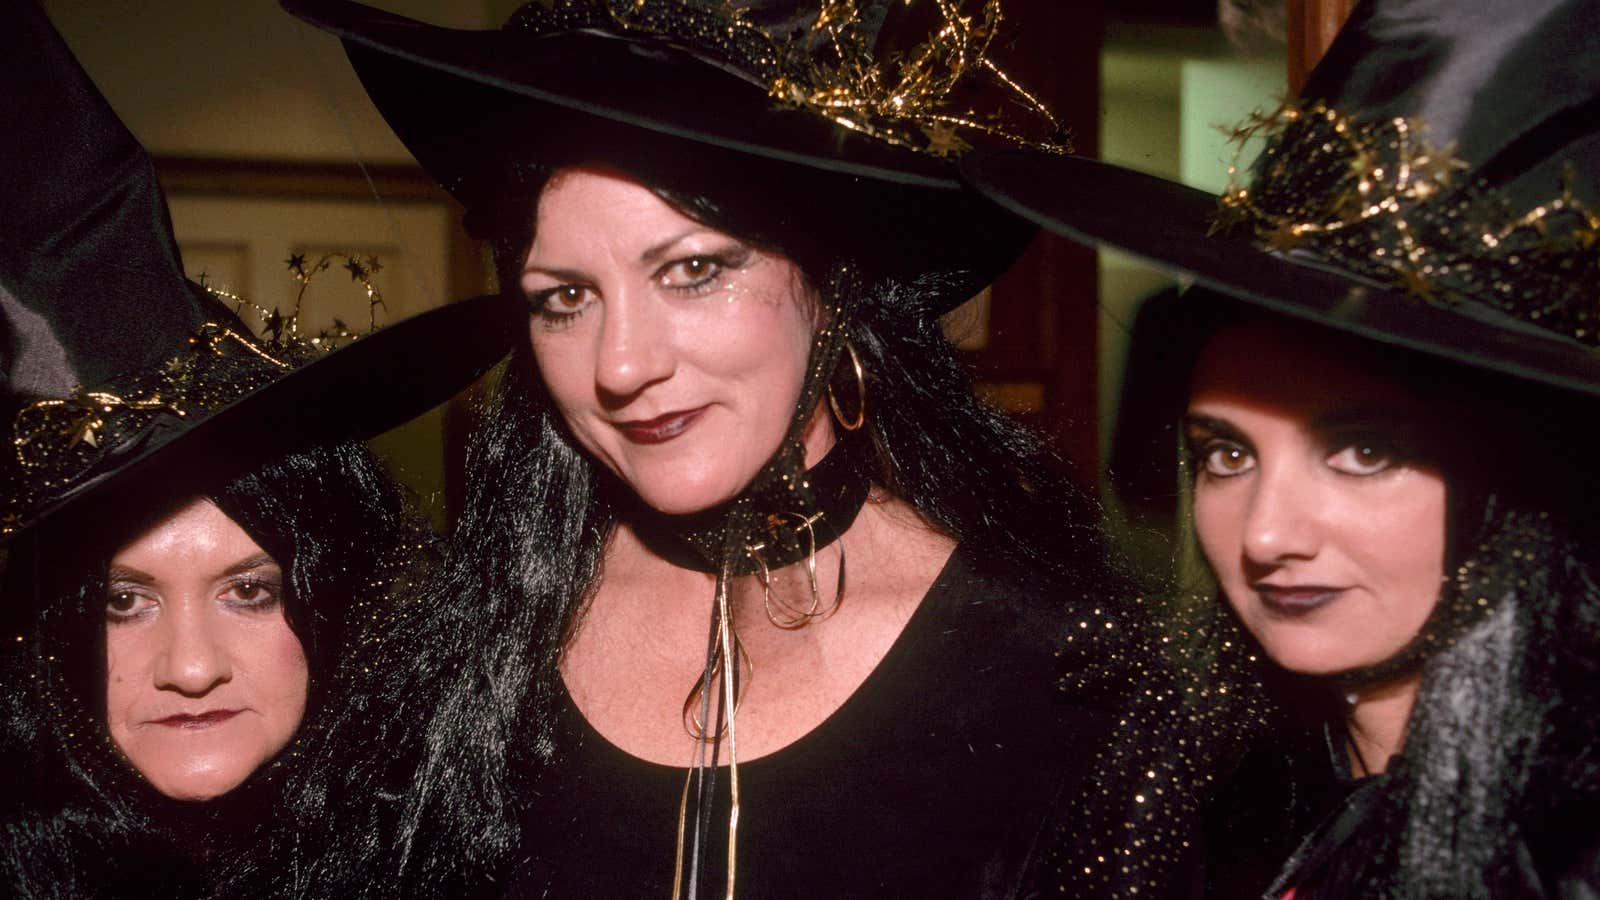 Merry-makers costumed as witches at the Salem Grand Hotel (not considered &quot;real&quot; witches by those in the cult), circa 1980.